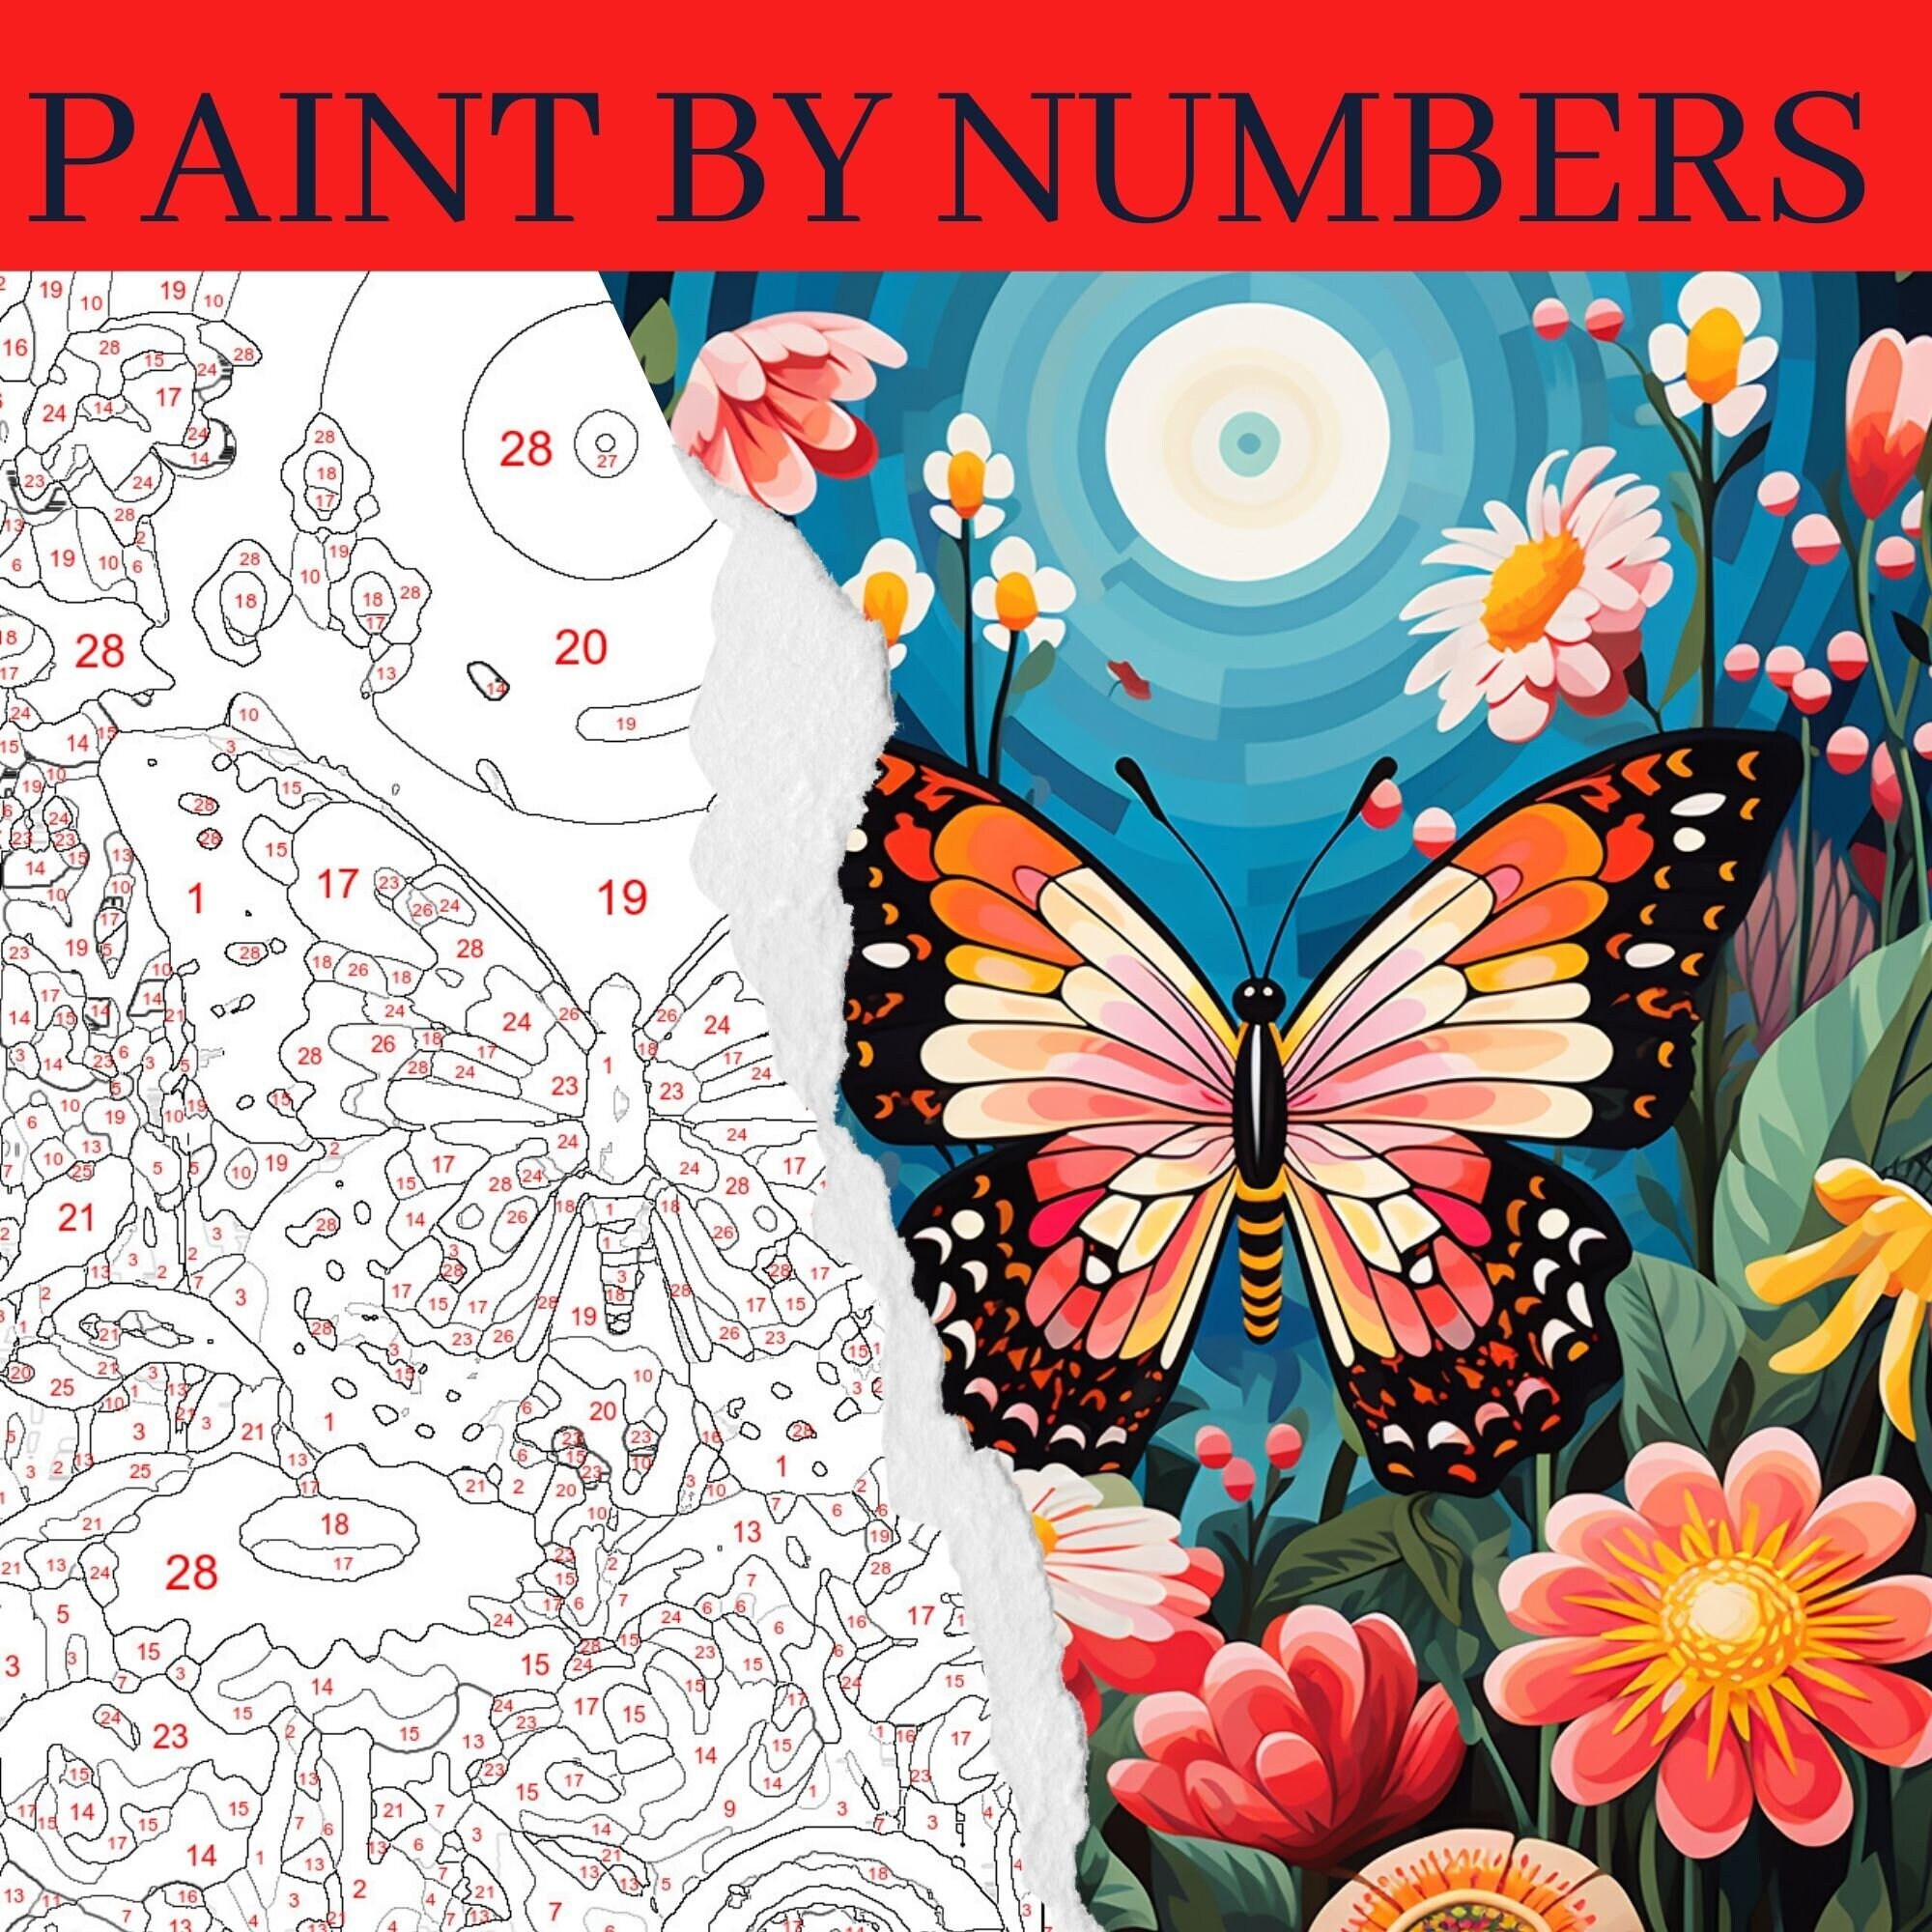 William Morris PAINT by NUMBER Kit Adult , Tree of Life Painting, Vintage  Art,easy DIY Beginners Acrylic Paint Kit Gift 